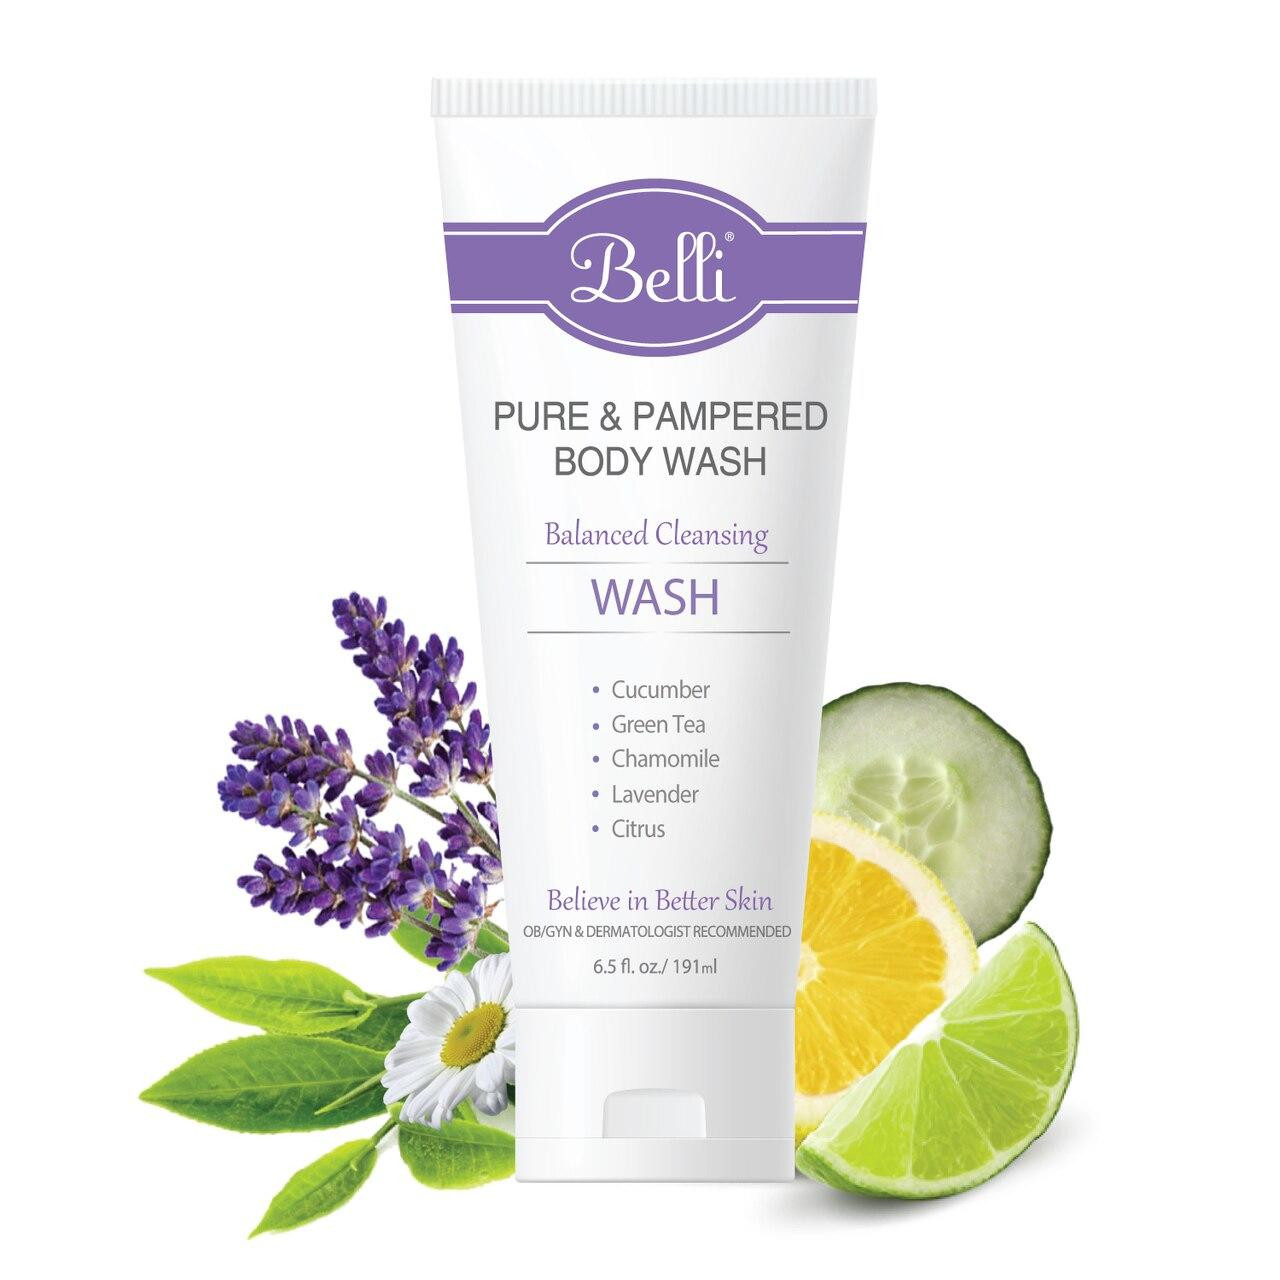 Belli Pure and Pampered Body Wash - Natural Body Wash